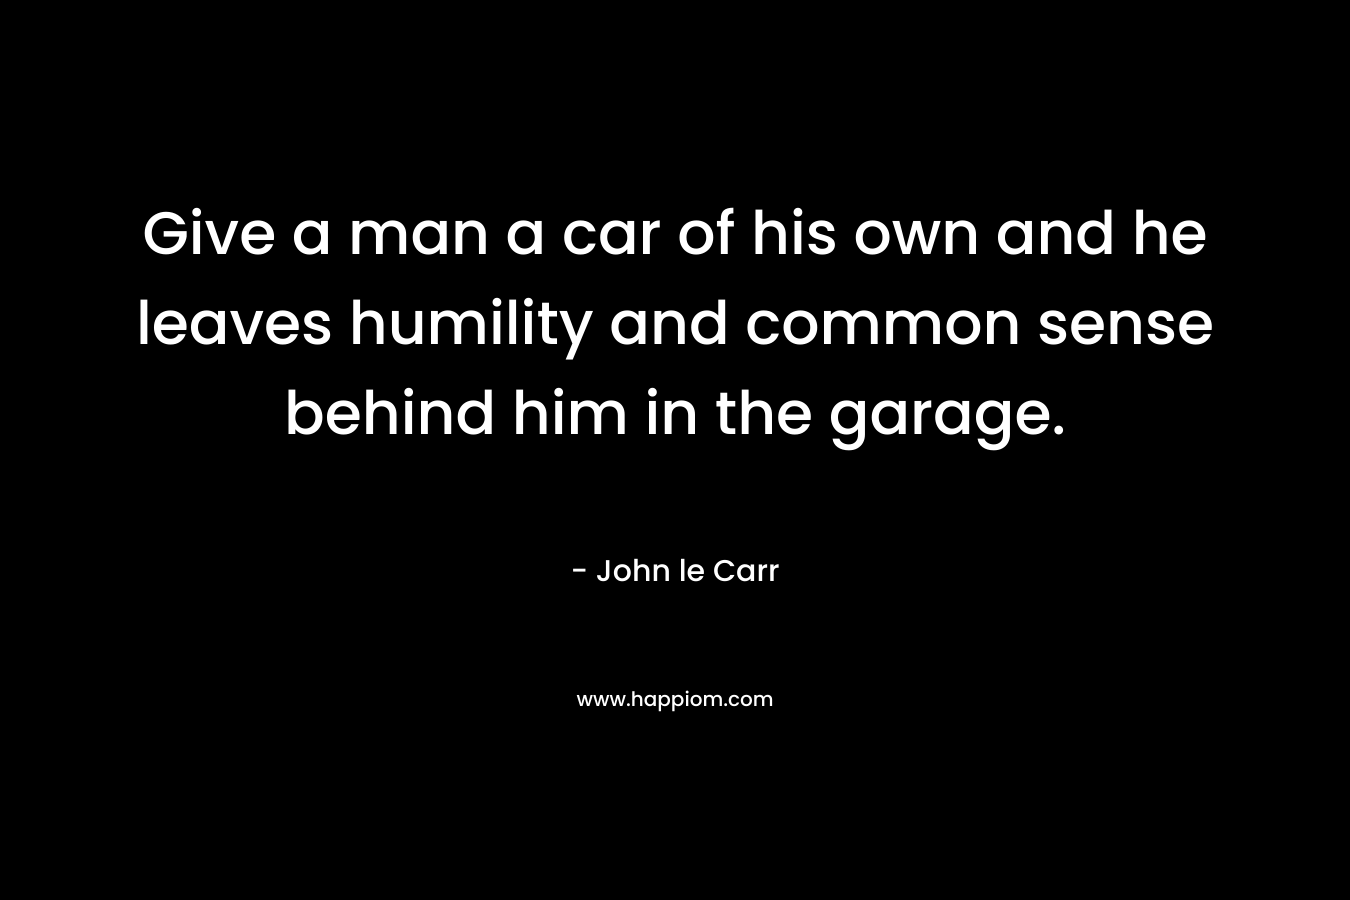 Give a man a car of his own and he leaves humility and common sense behind him in the garage. – John le Carr